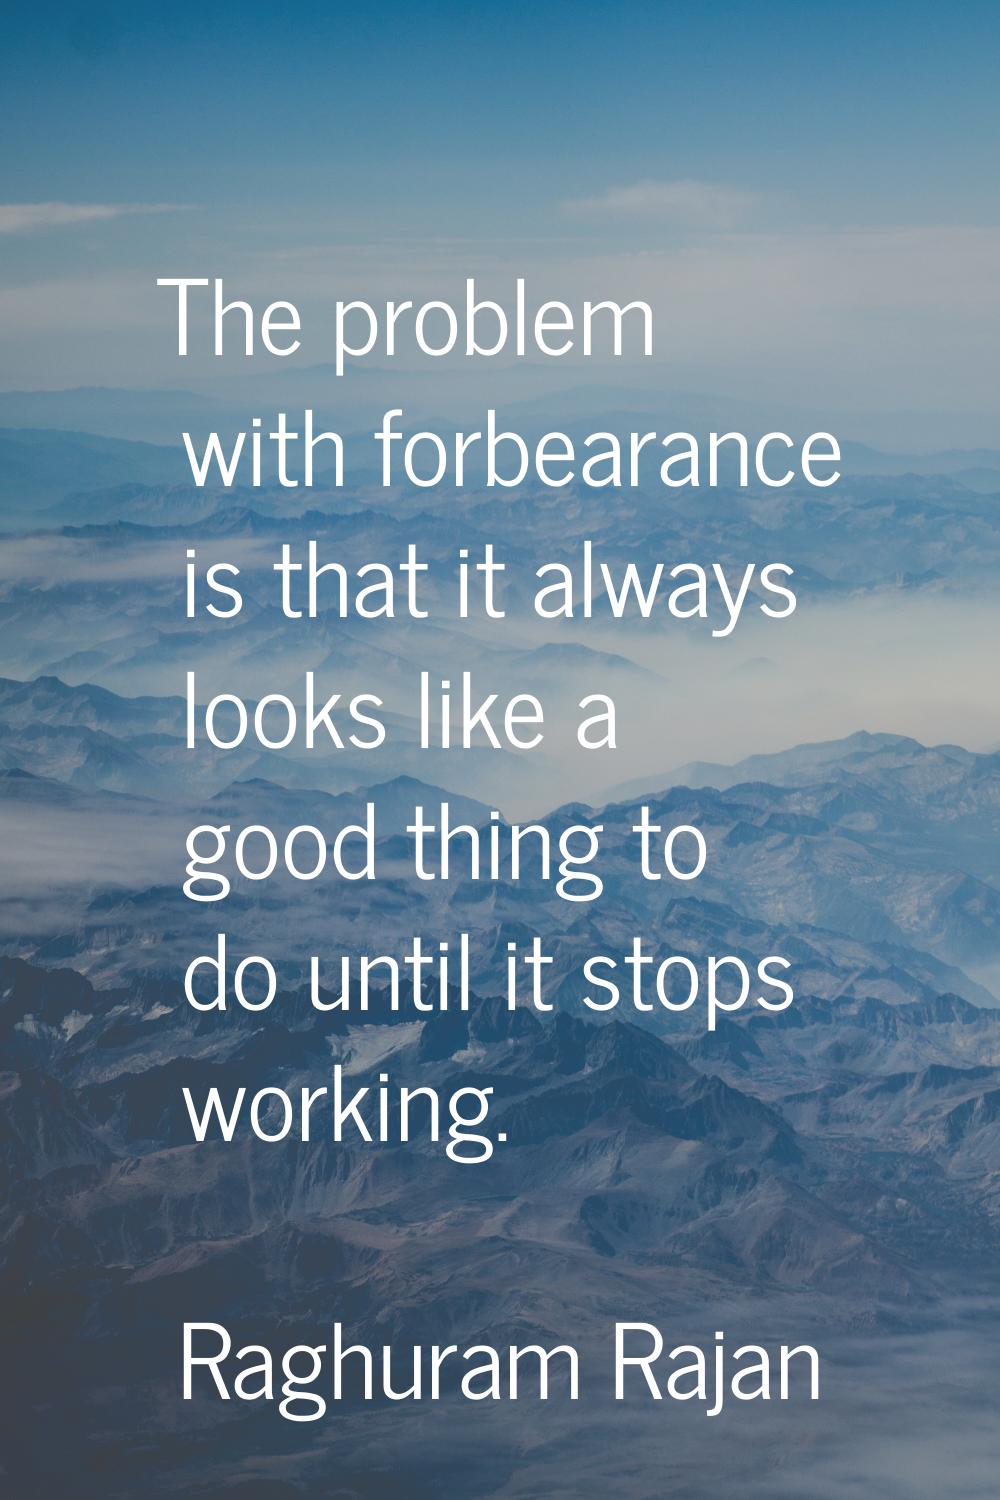 The problem with forbearance is that it always looks like a good thing to do until it stops working